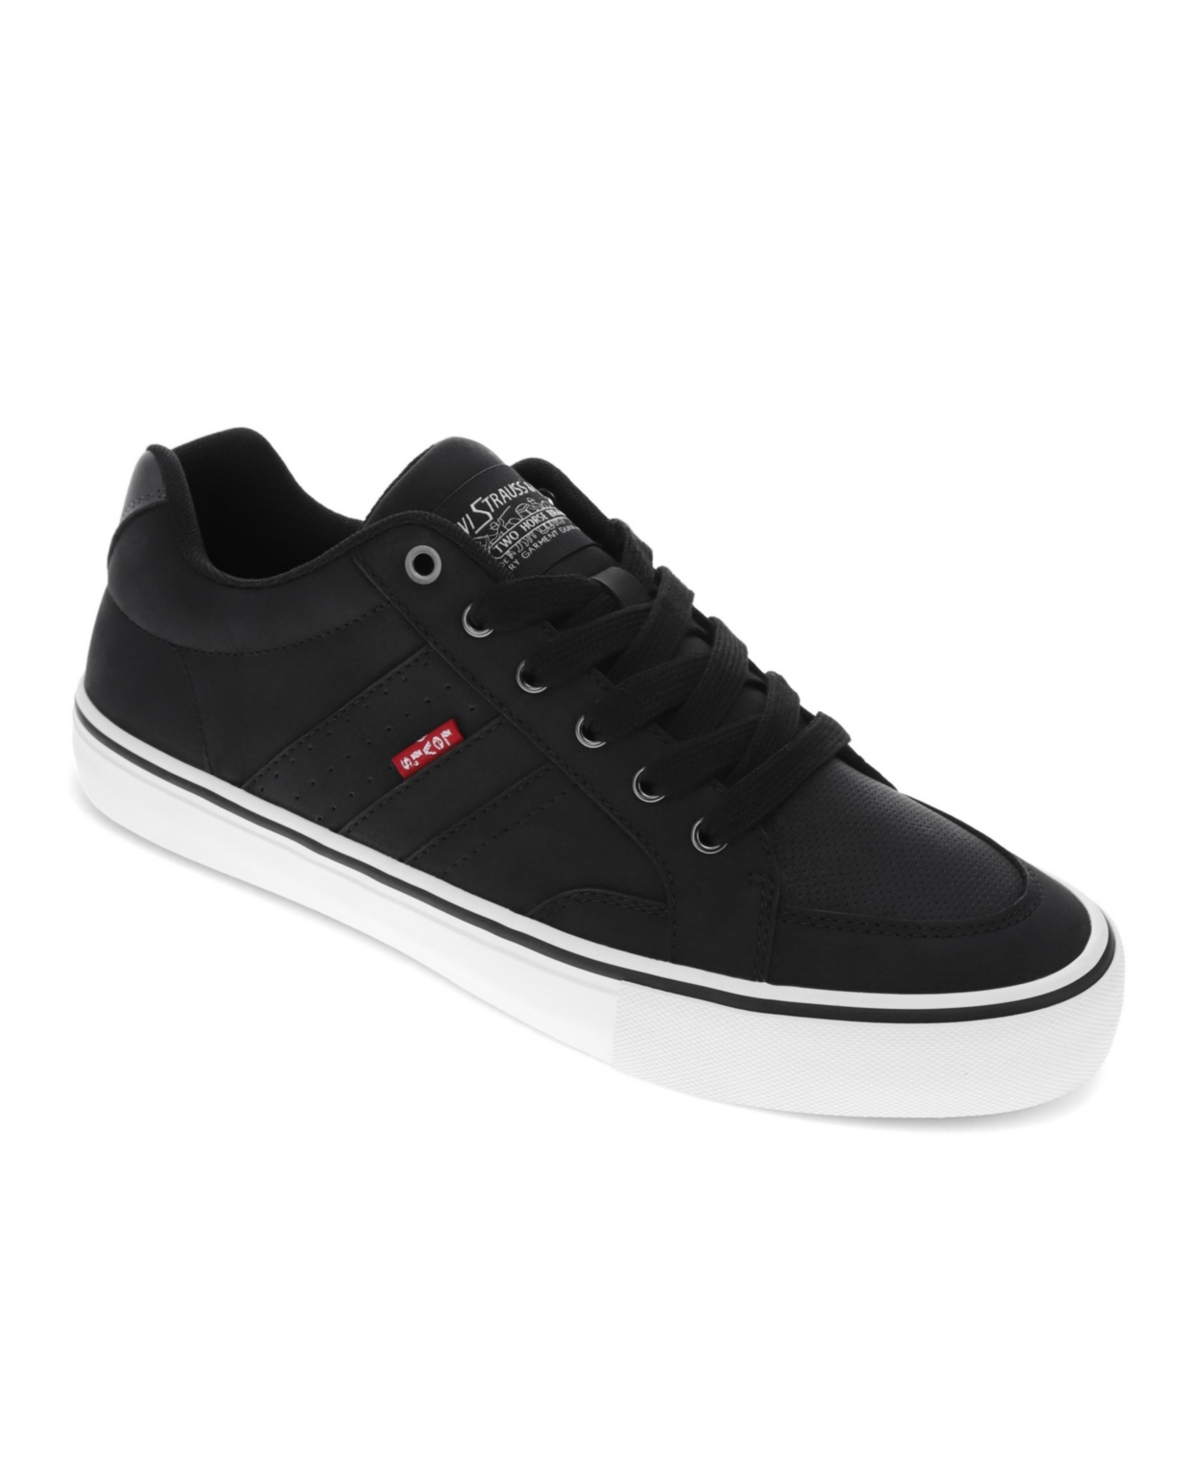 Shop Levi's Men's Avery Fashion Athletic Comfort Sneakers In Black,charcoal